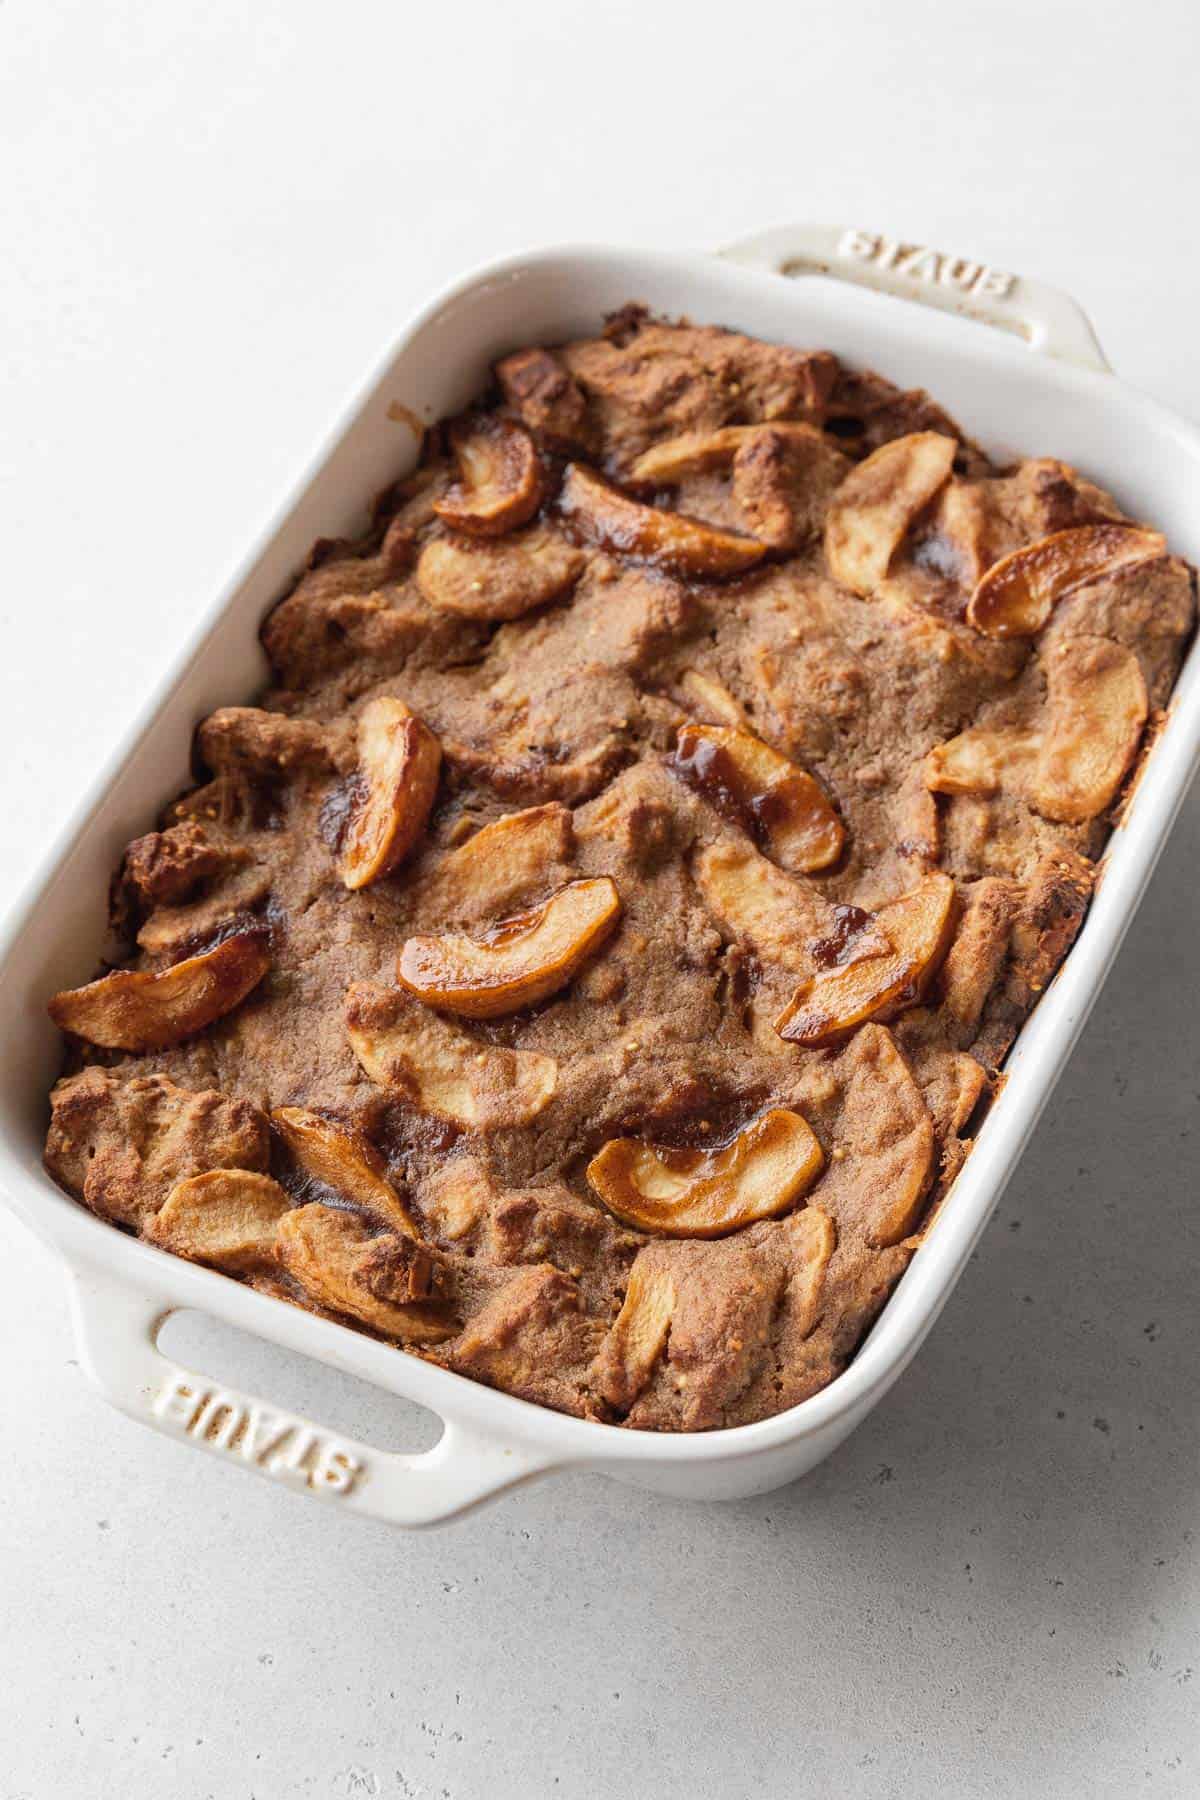 Vegan bread pudding baked in a white casserole dish.